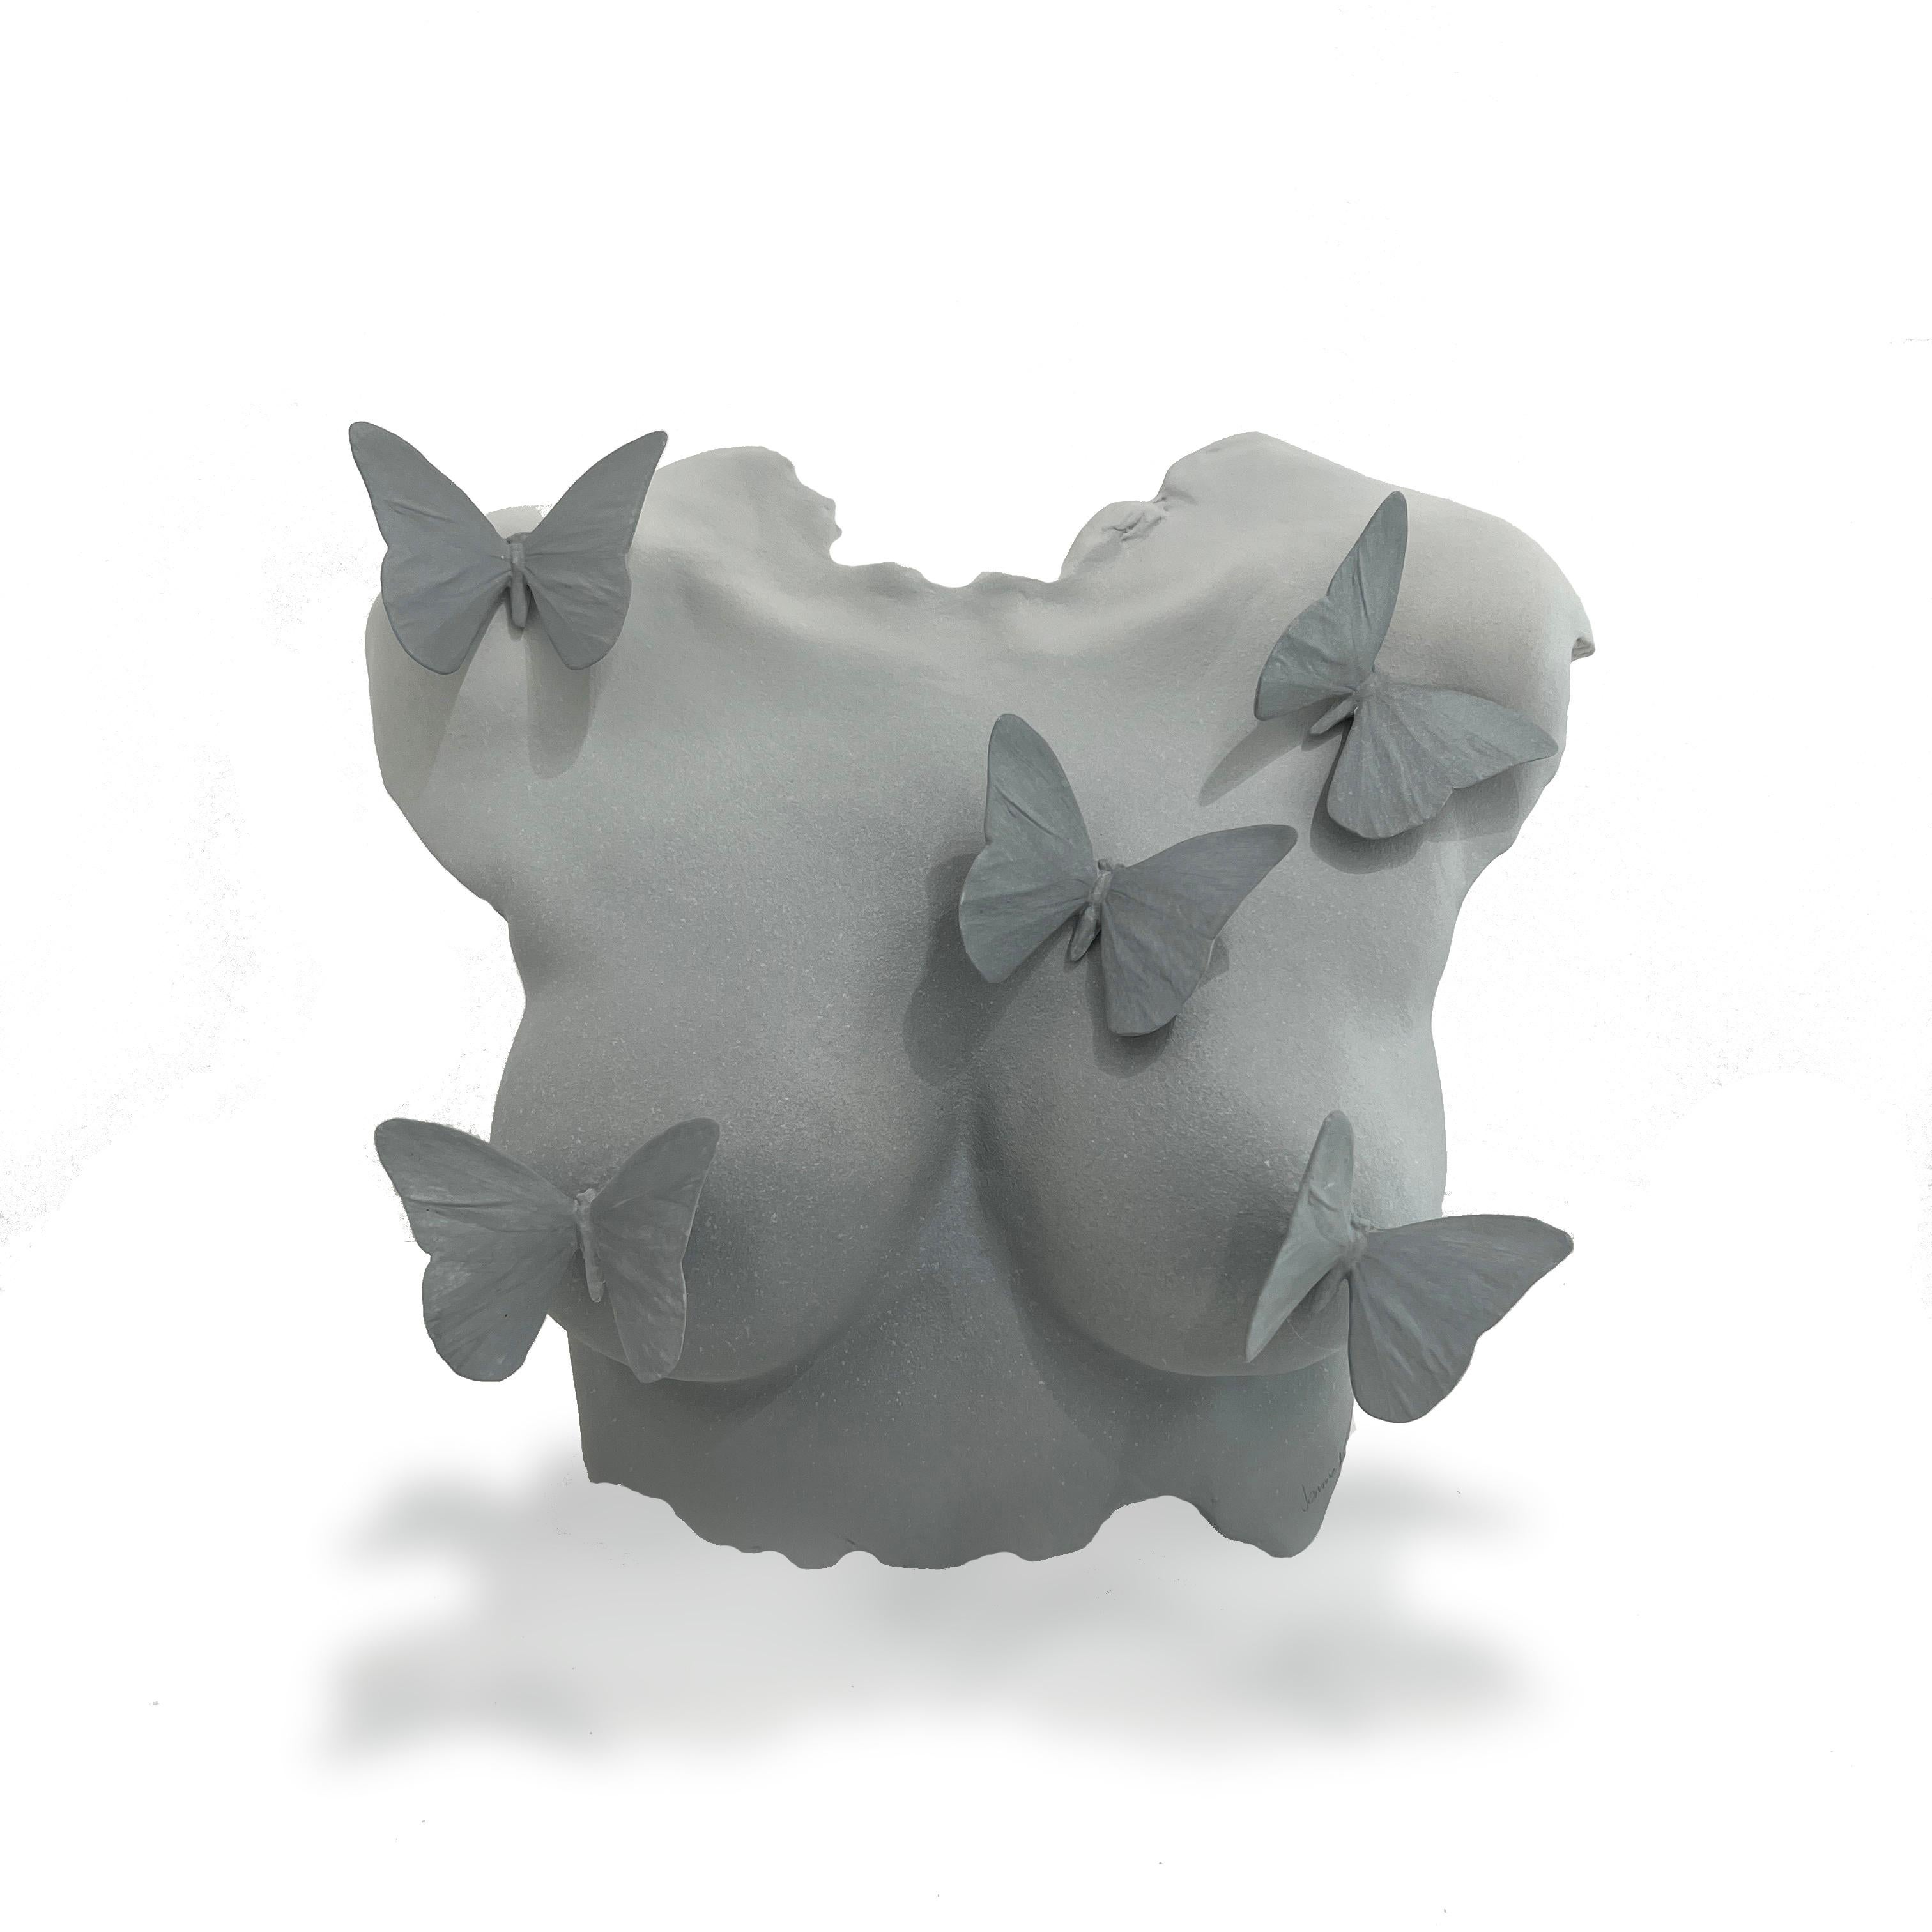 This exquisite freestanding sculpture, measuring 13 inches high and 16 inches wide, and 7 inches deep, is a true work of art. The piece is created with a light grey matte glaze that imbues it with a soft and ethereal quality, elevating the overall